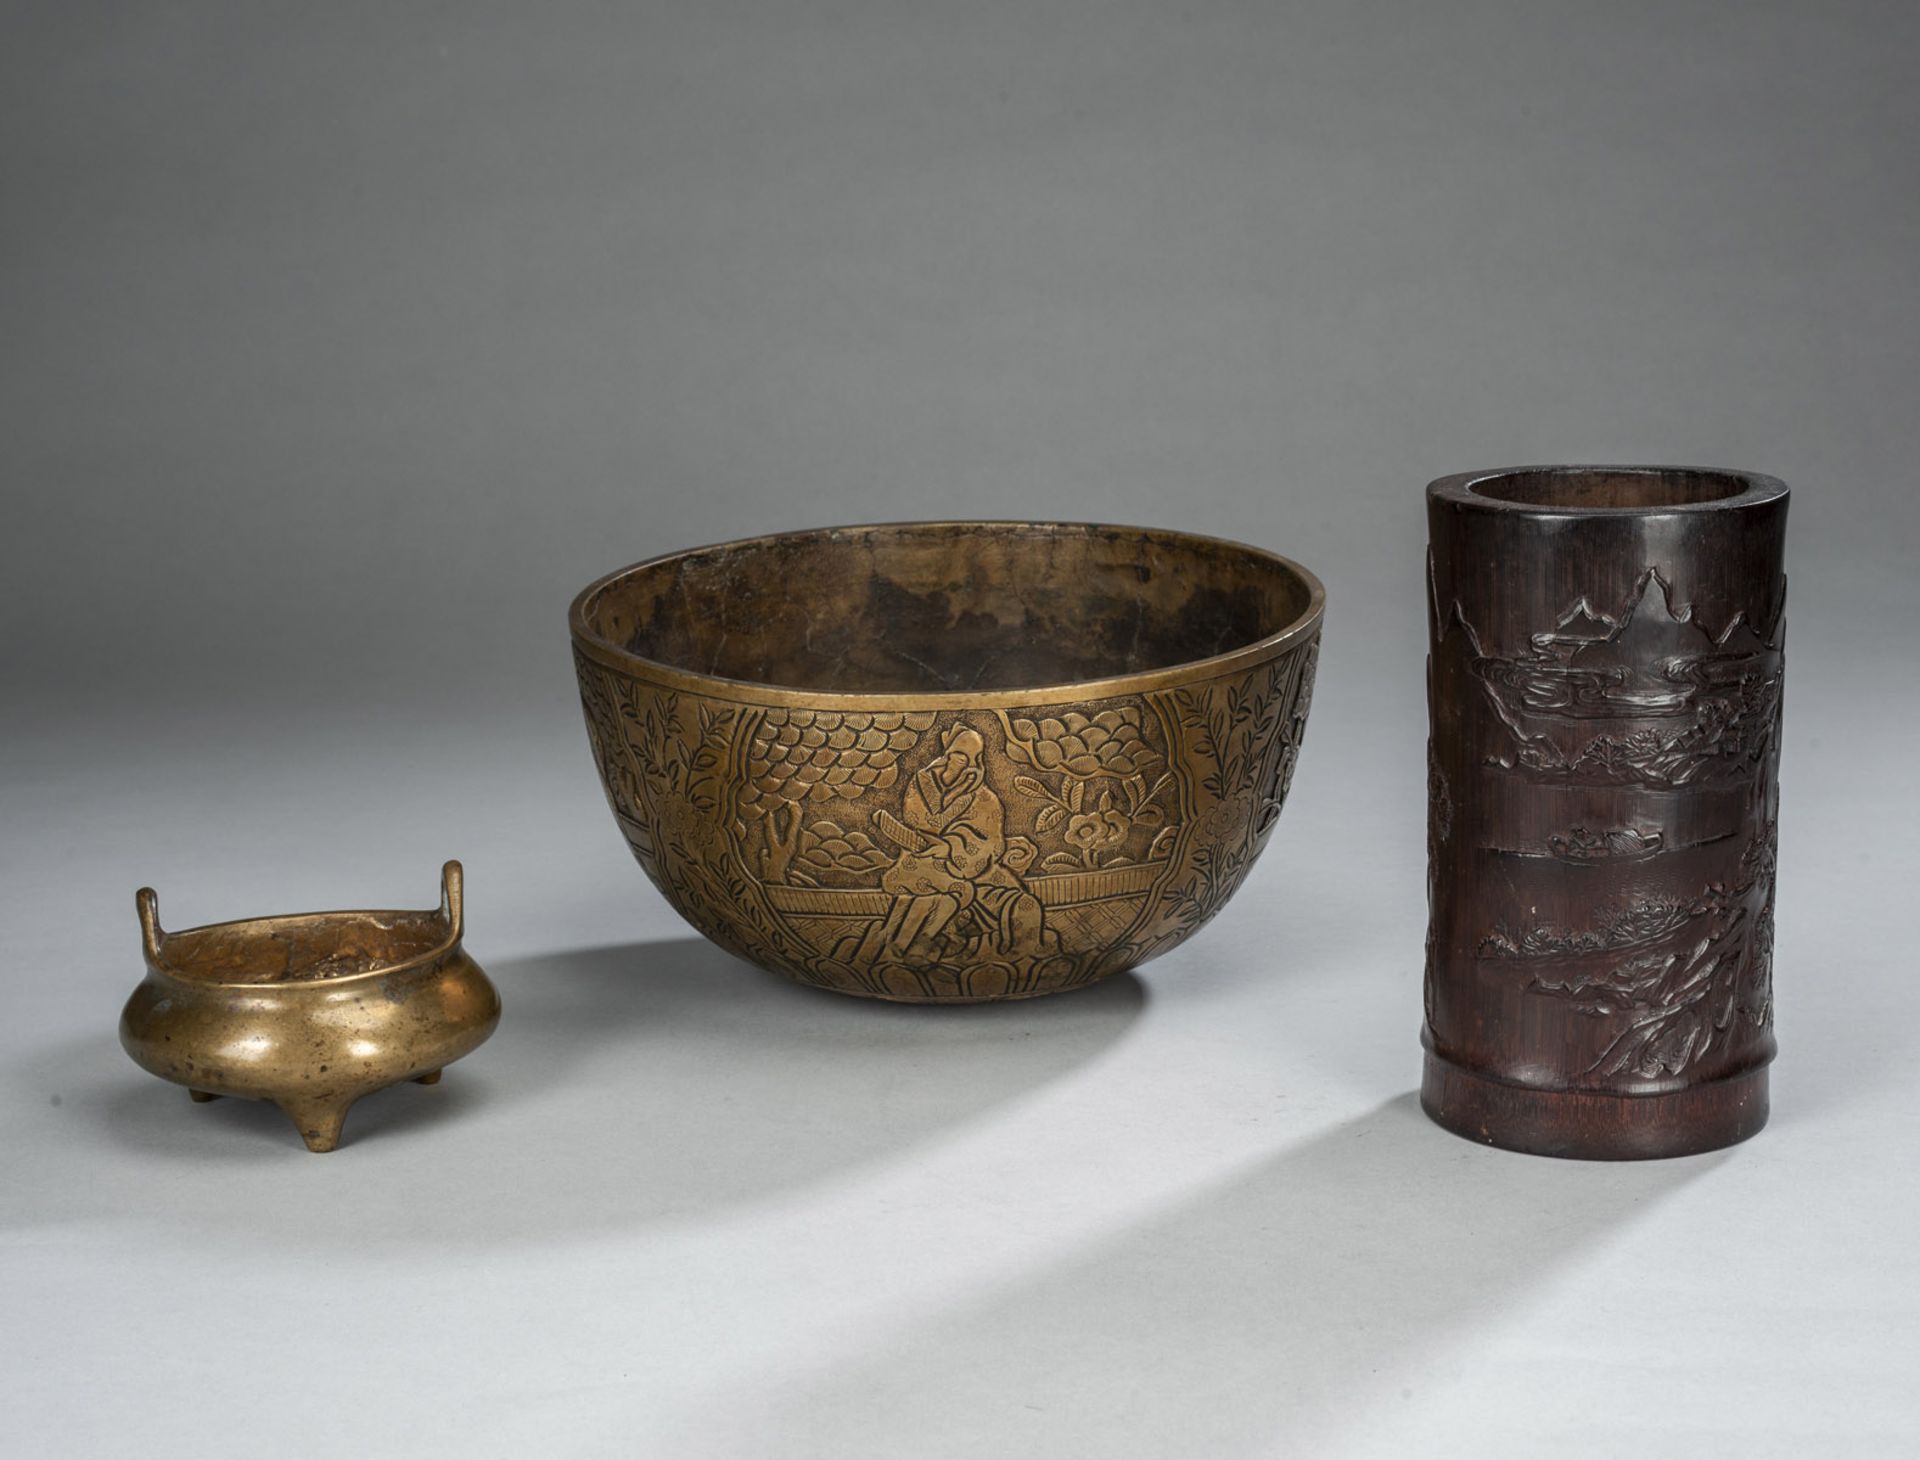 A BRONZE BOWL, A BRONZE INCENSE AND A BAMBOO BRUSH POT WITH A LAKE LANDSCAPE IN RELIEF - Image 2 of 6